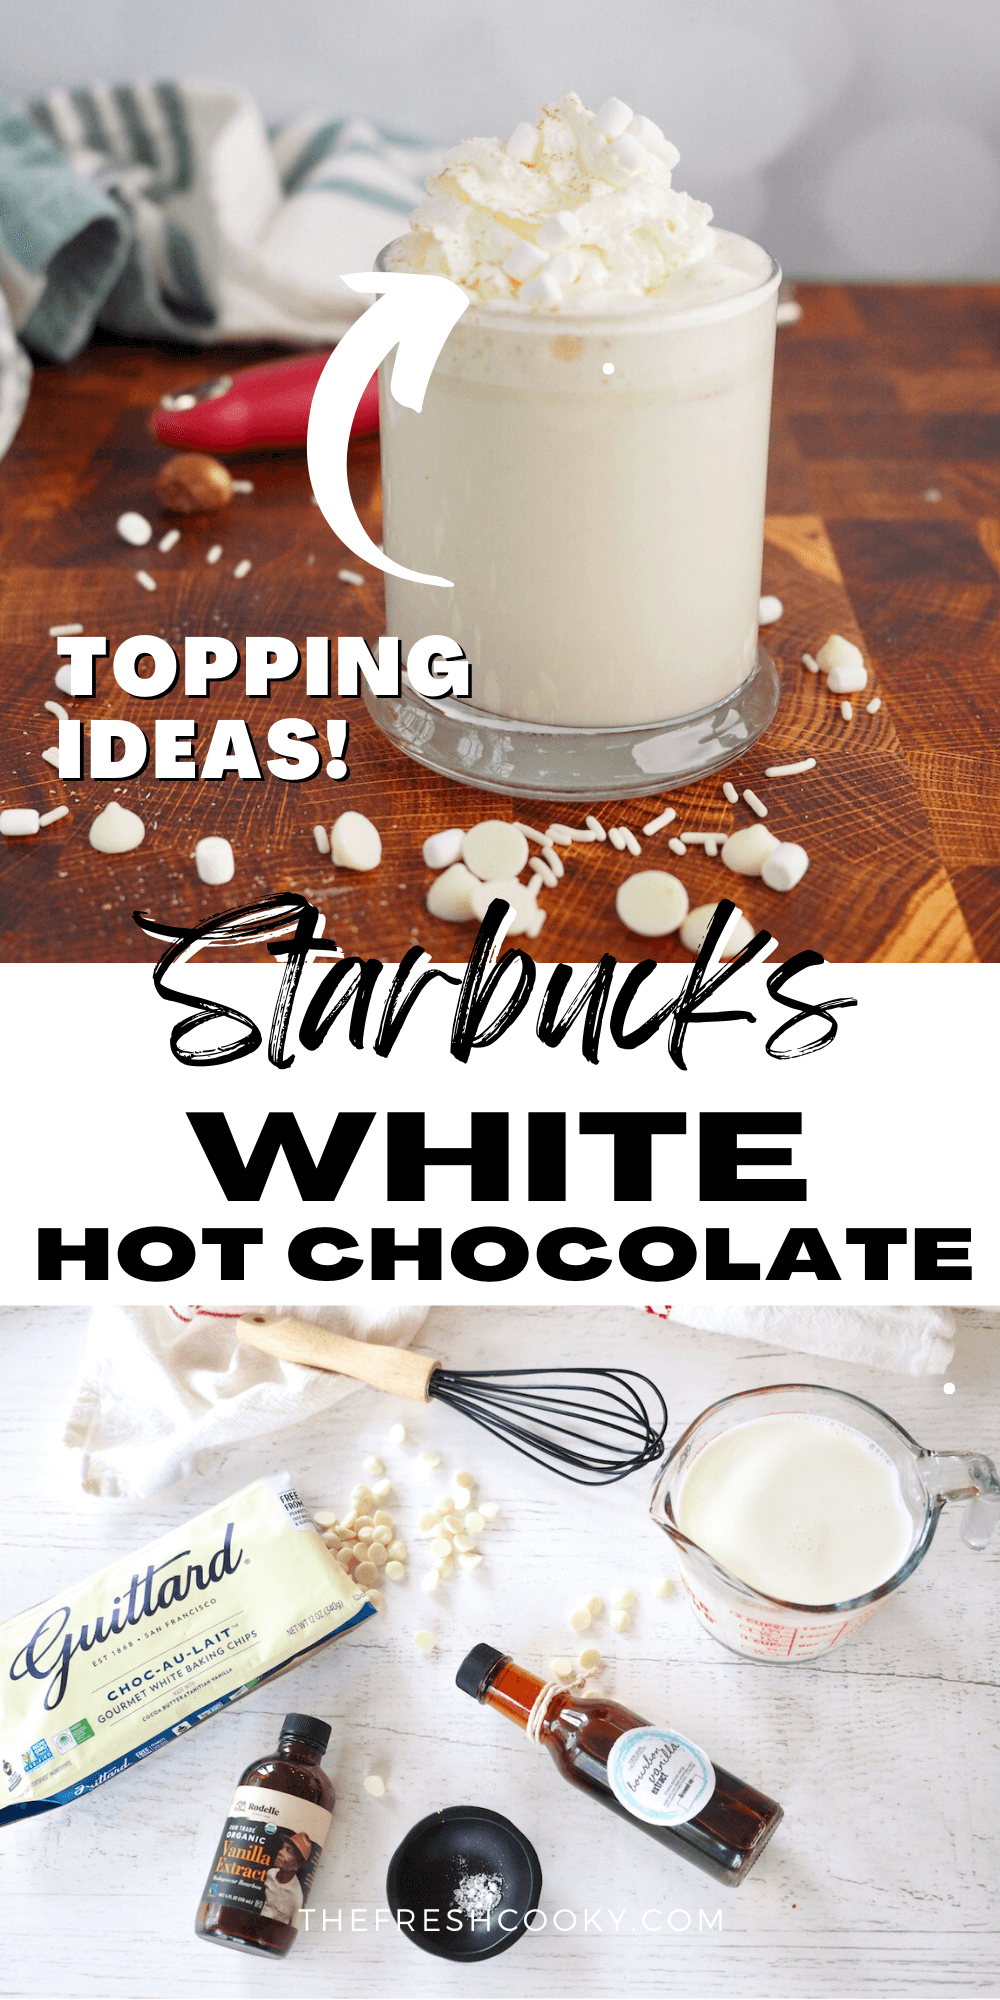 Copycat Starbucks White Hot Chocolate Pin with top image of glass mug filled with creamy white hot chocolate and bottom image of simple ingredients.